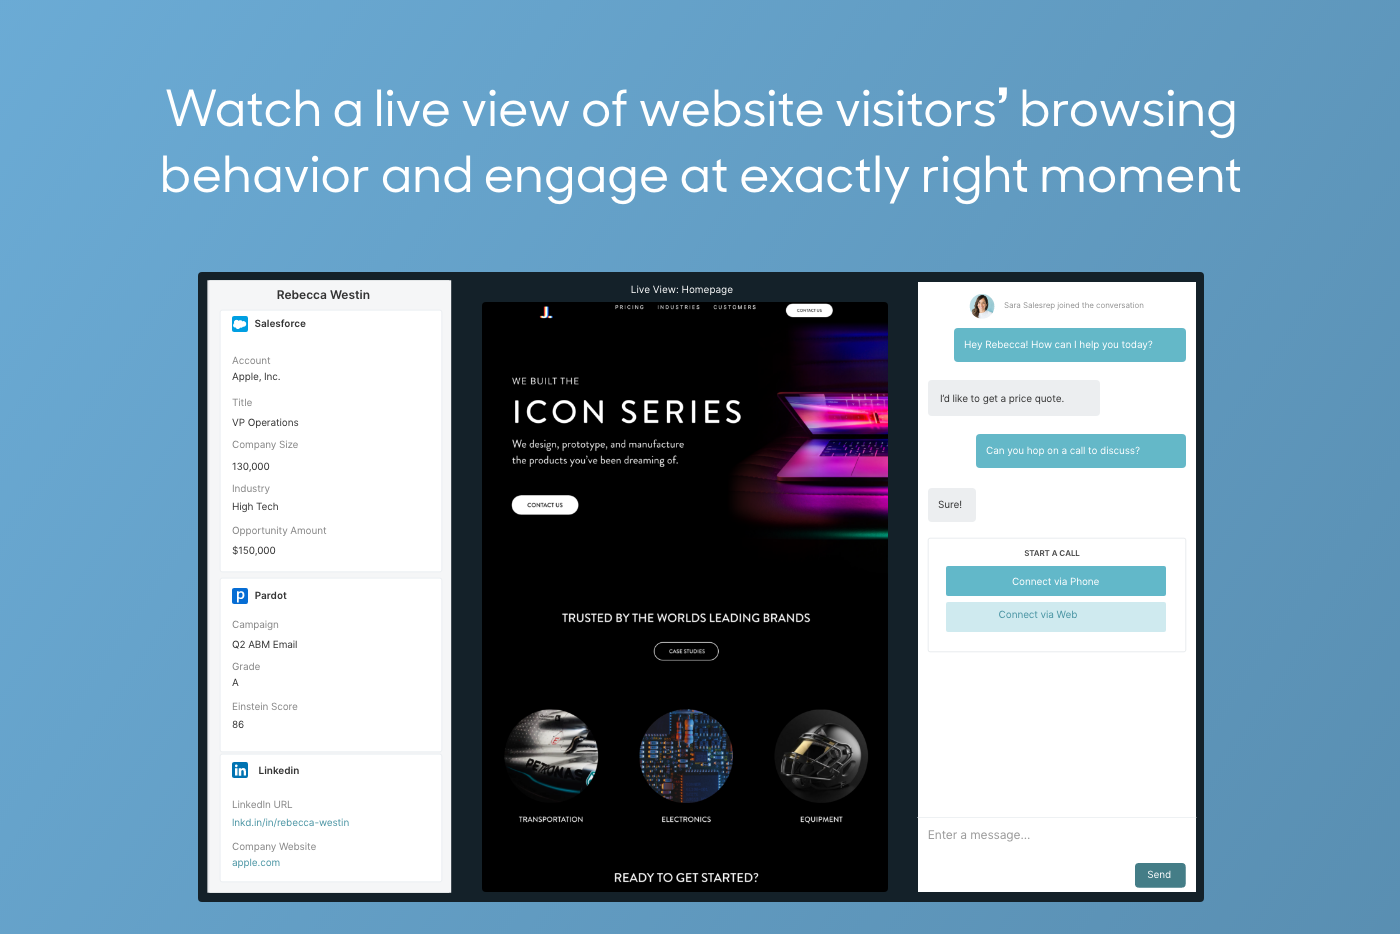 See exactly how your website visitors are browsing your content and engage at the exact right moment with personalized, contextual sales conversations. Also see a full timeline of their browsing behavior and what brought them to your site.